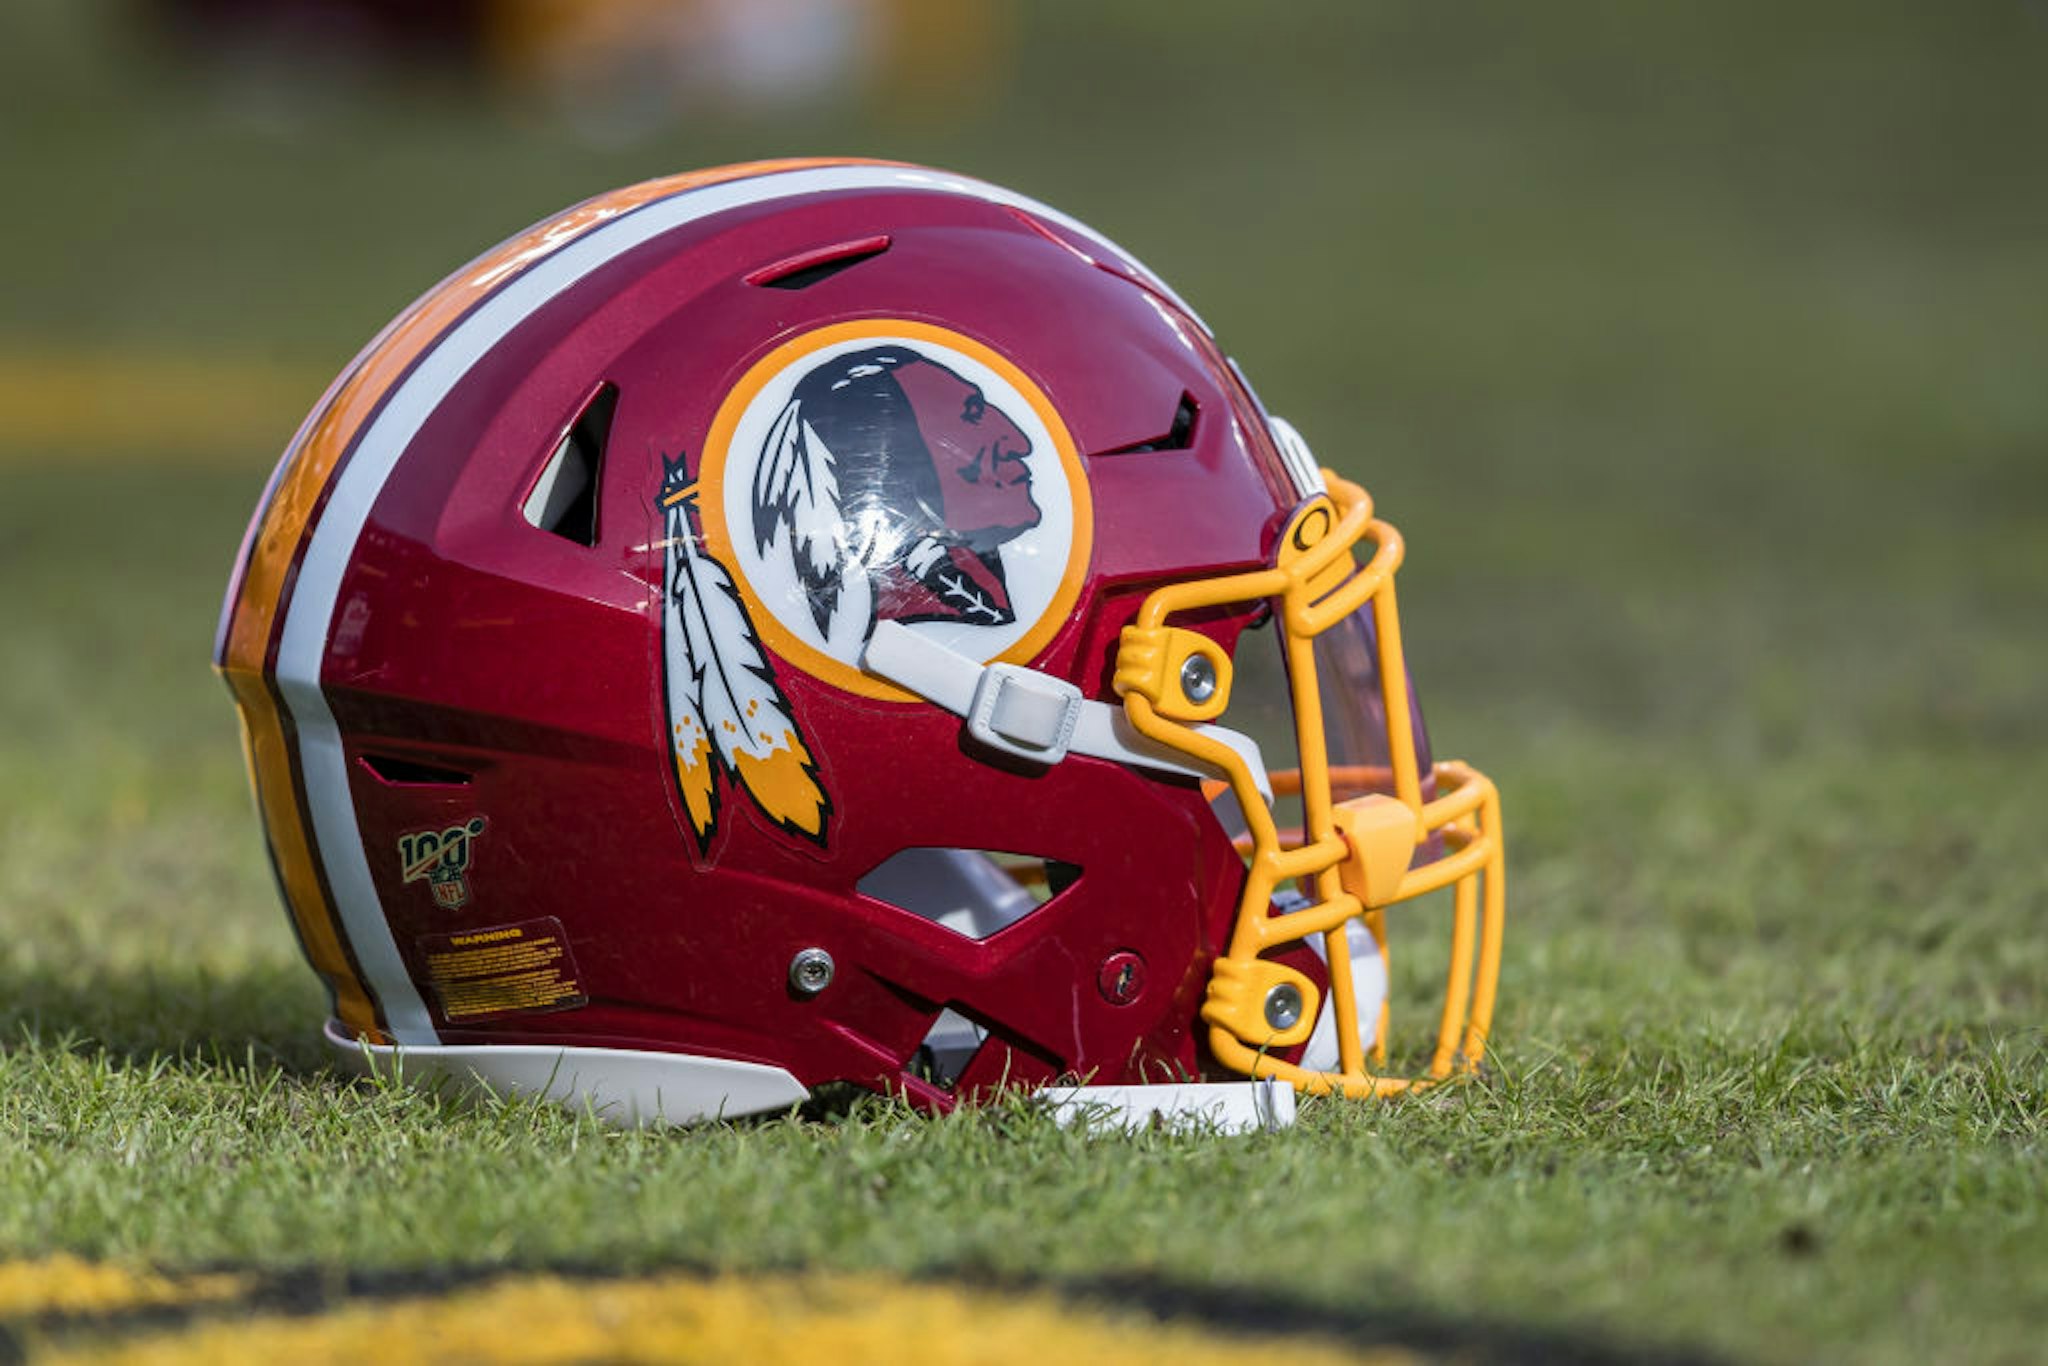 A Washington Redskins helmet is seen on the field before the game between the Washington Redskins and the New York Giants at FedExField on December 22, 2019 in Landover, Maryland.